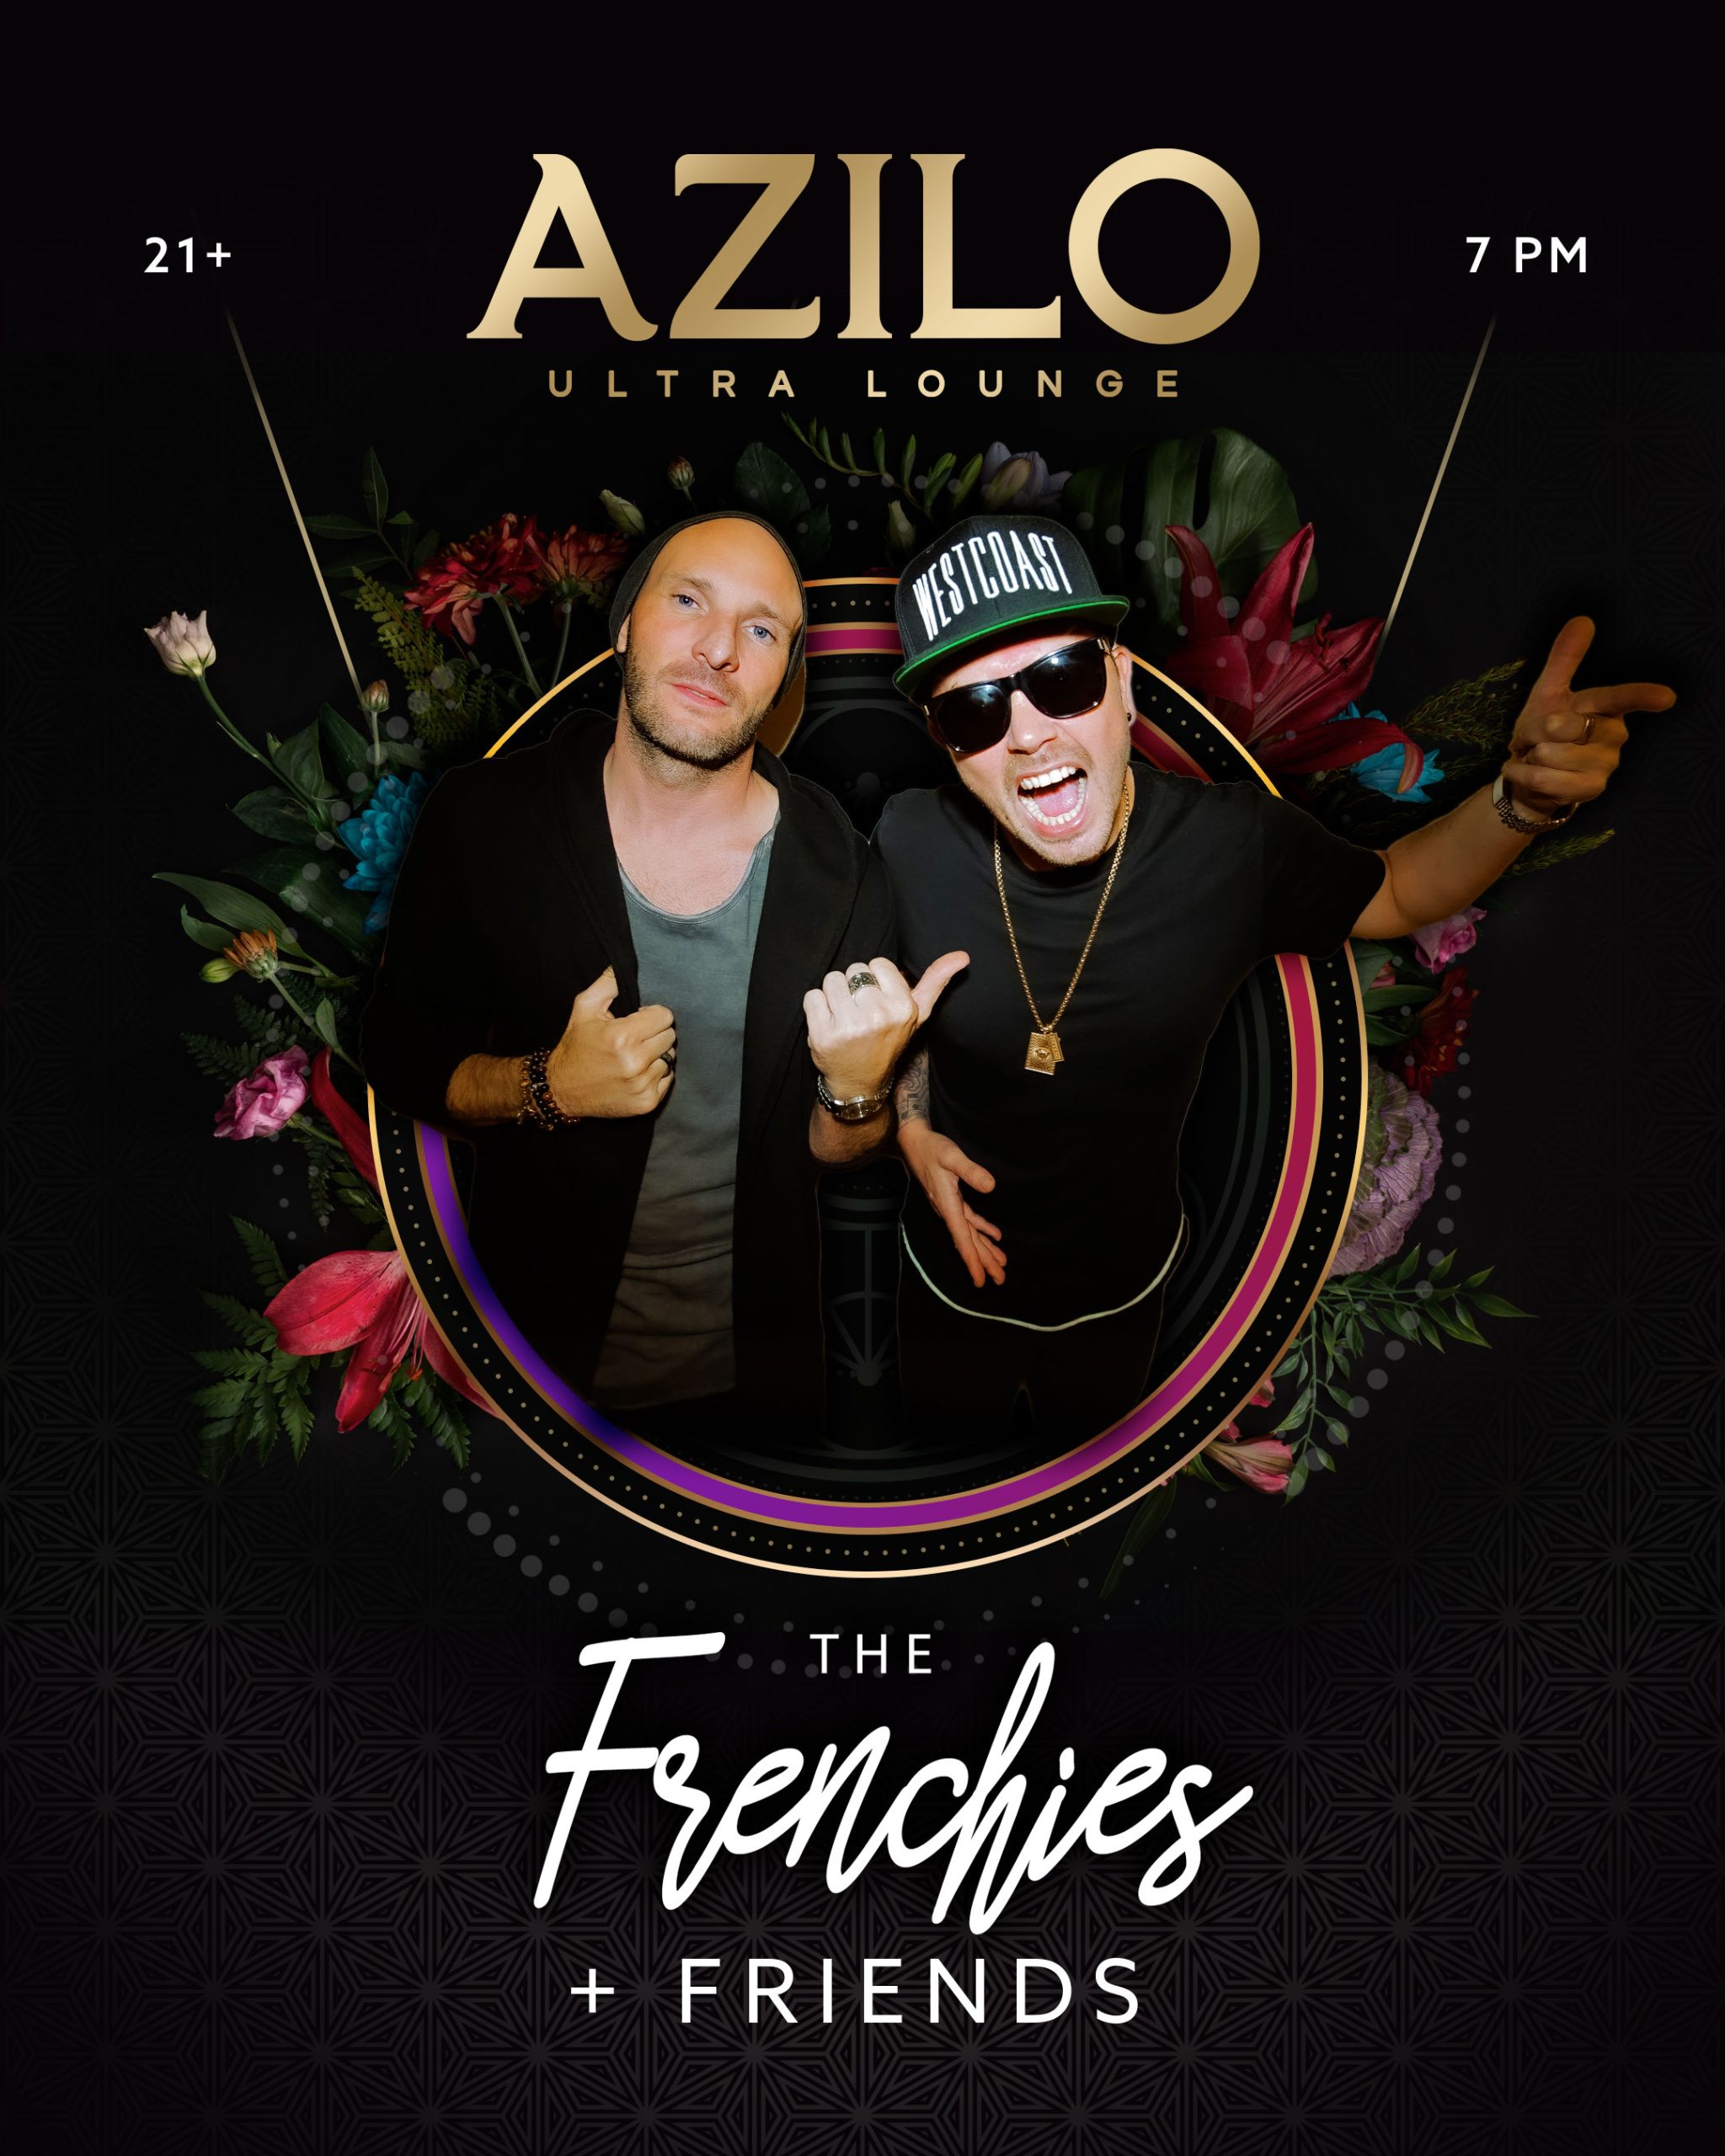 The Frenchies and Friends at Azilo Ultra Lounge